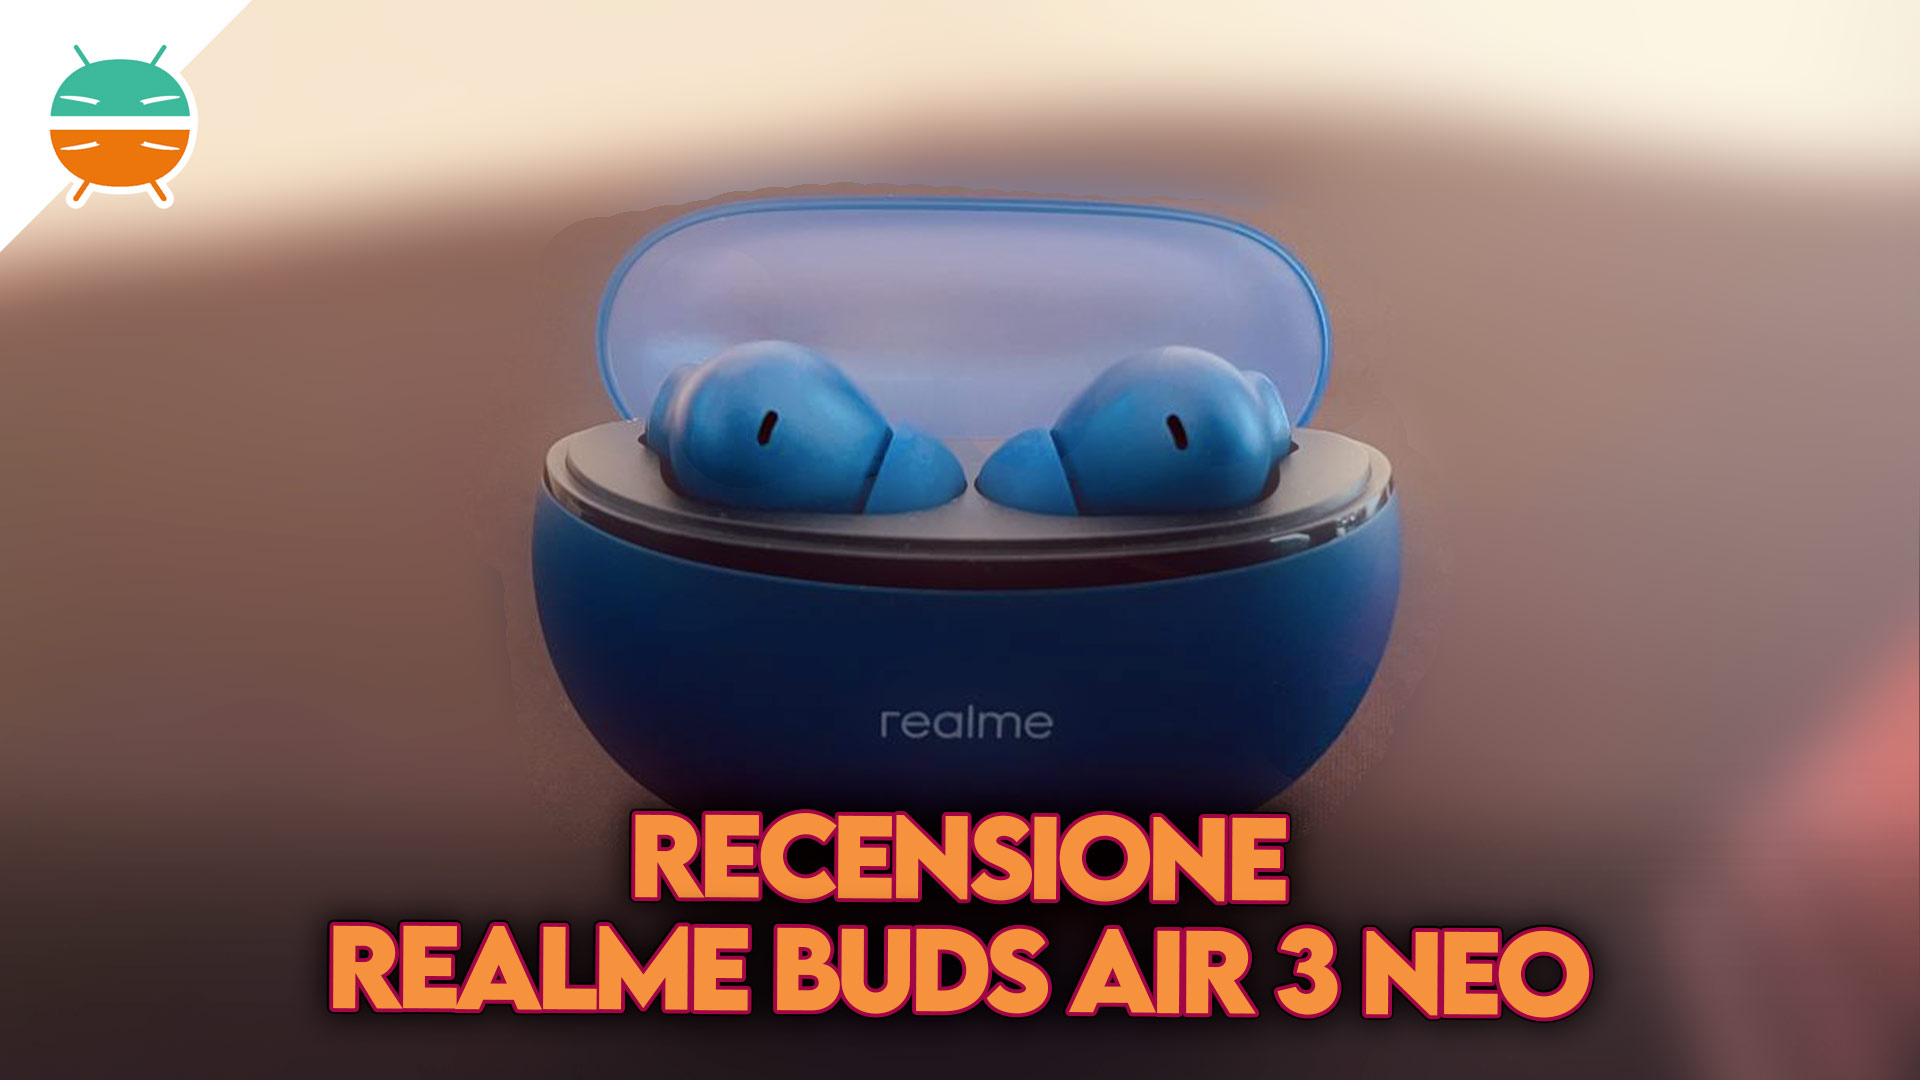 Realme Buds Air 3 Neo Review: Good for the Price